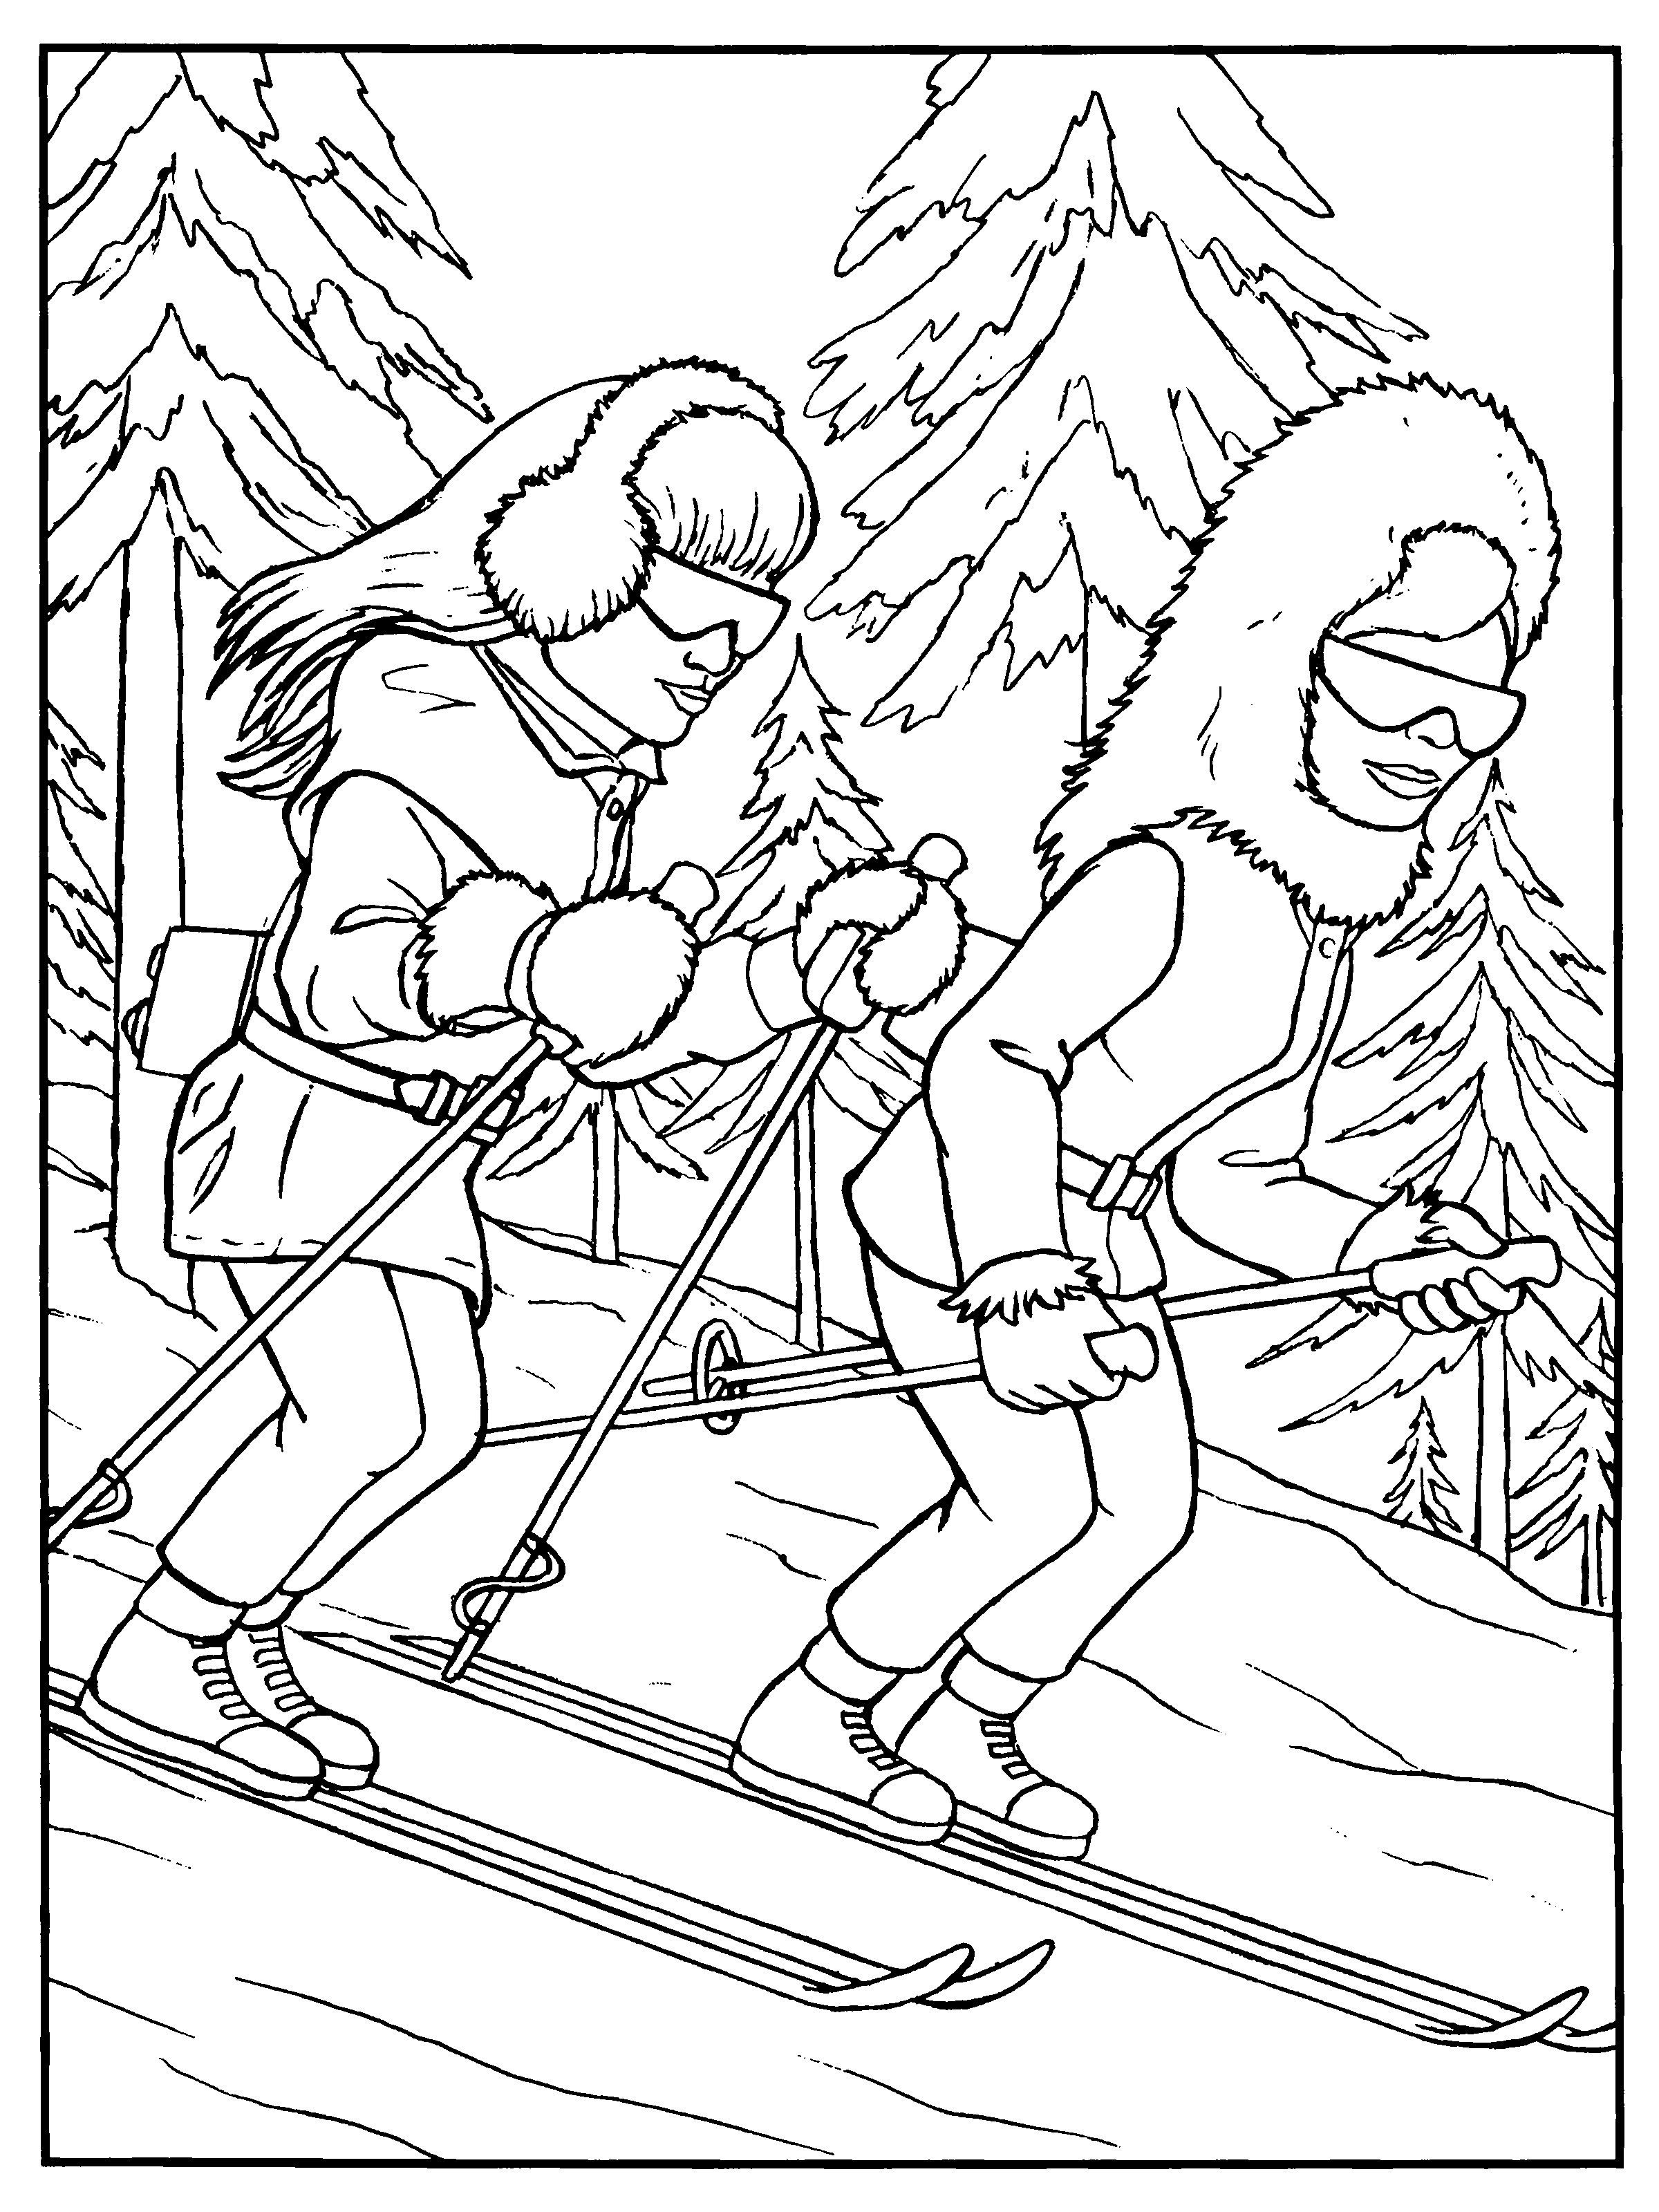 Thunderbirds Coloring Pages Coloringpages1001com